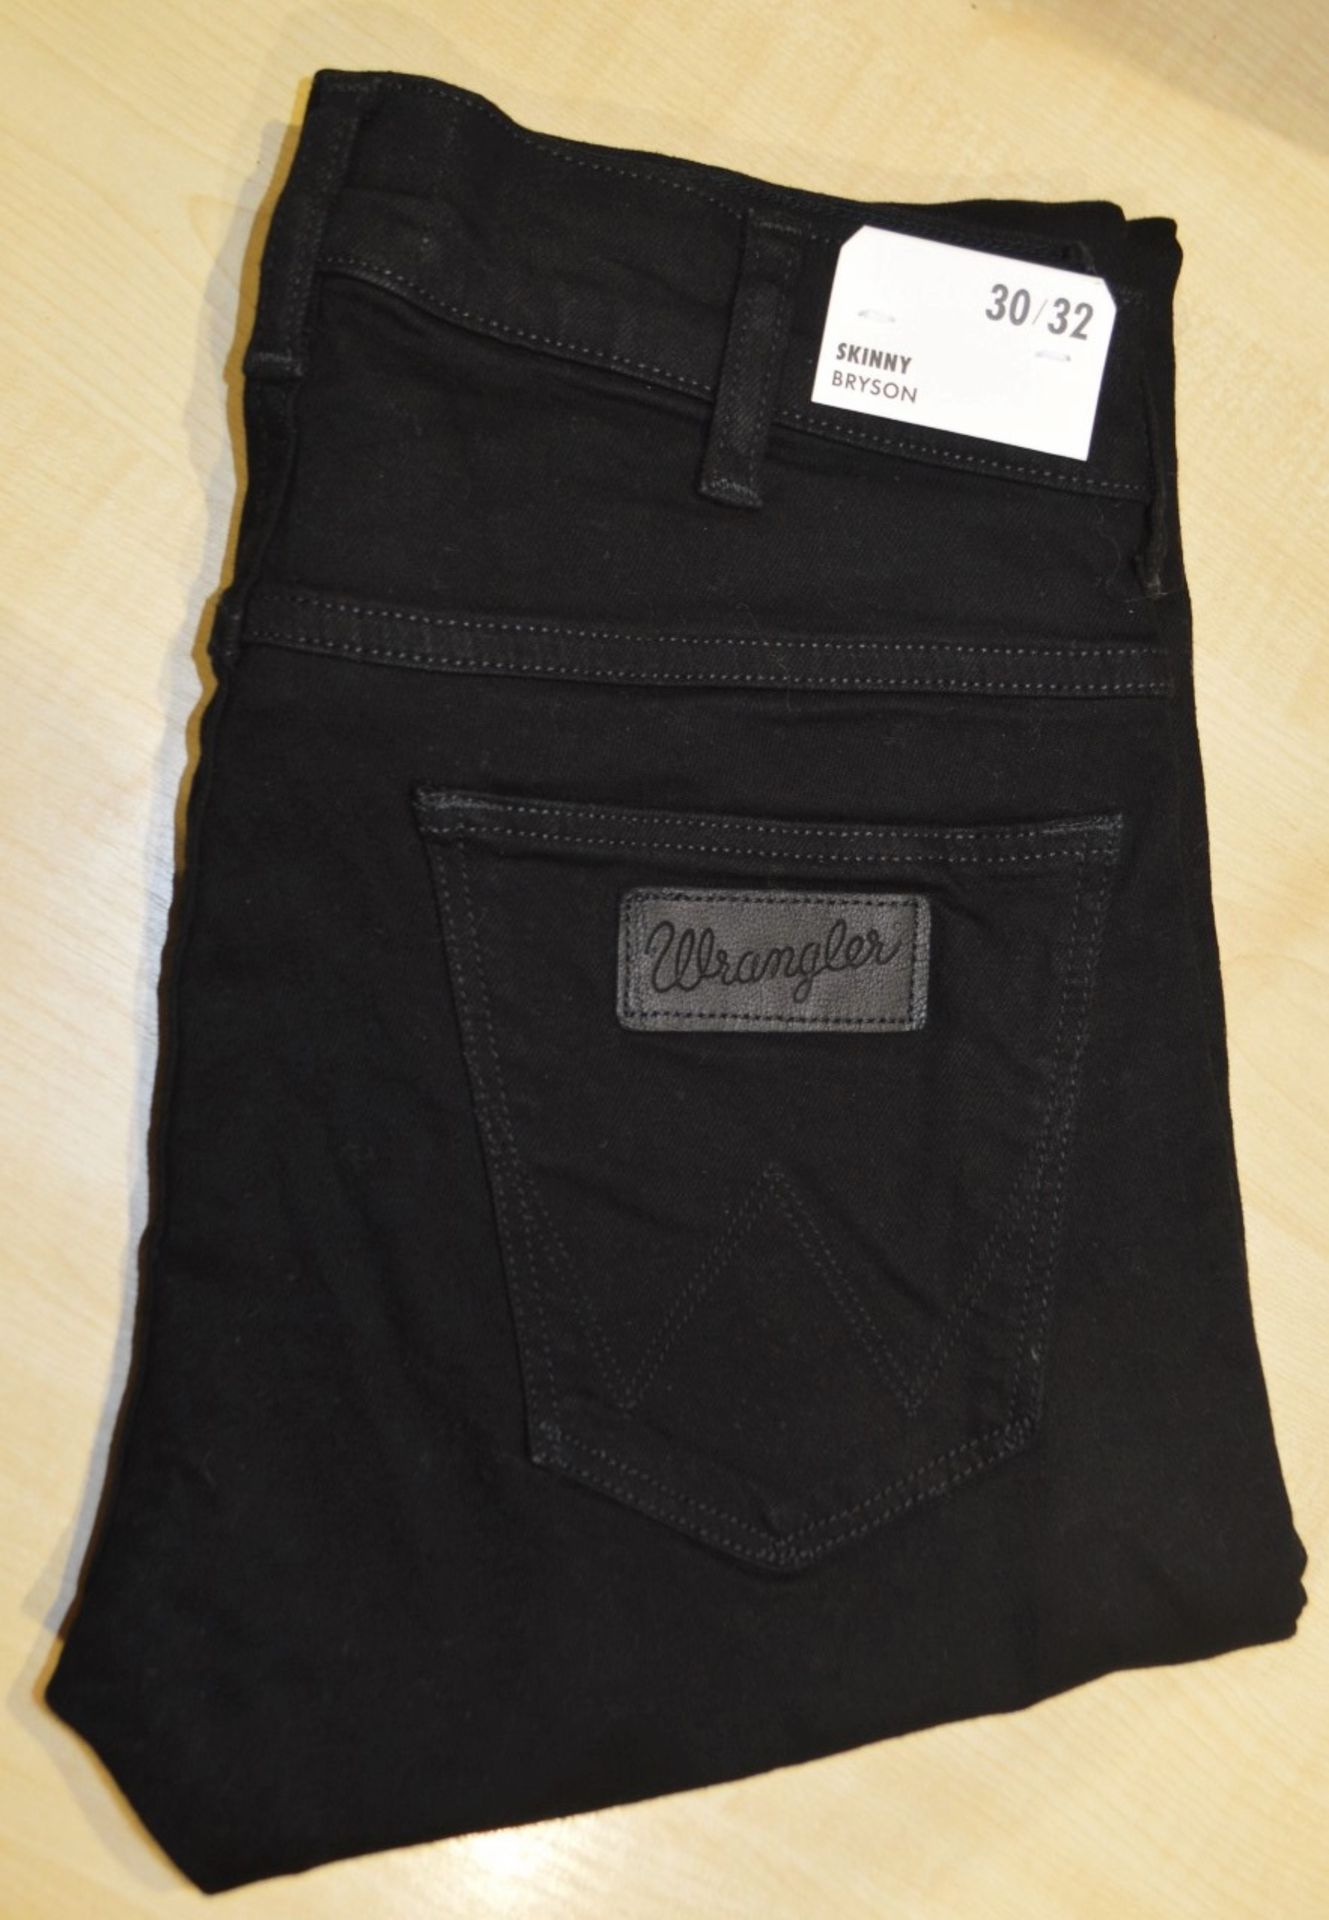 1 x Pair Of Men's Genuine Wrangler Jeans In Black - Size: 30/32 - Preowned, Like New With Tags - - Image 2 of 10